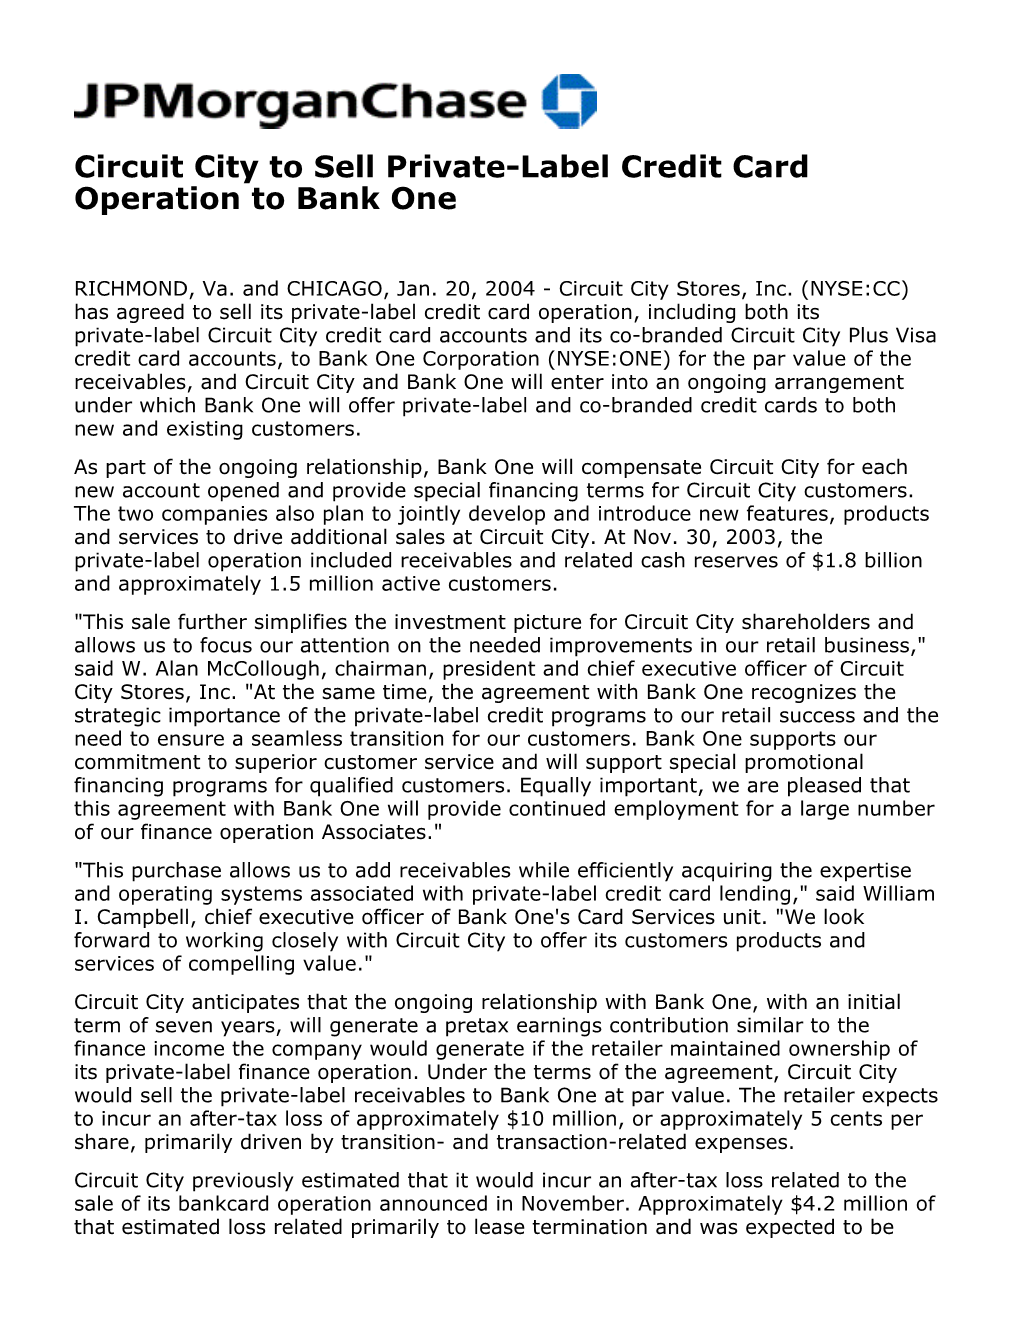 Circuit City to Sell Private-Label Credit Card Operation to Bank One